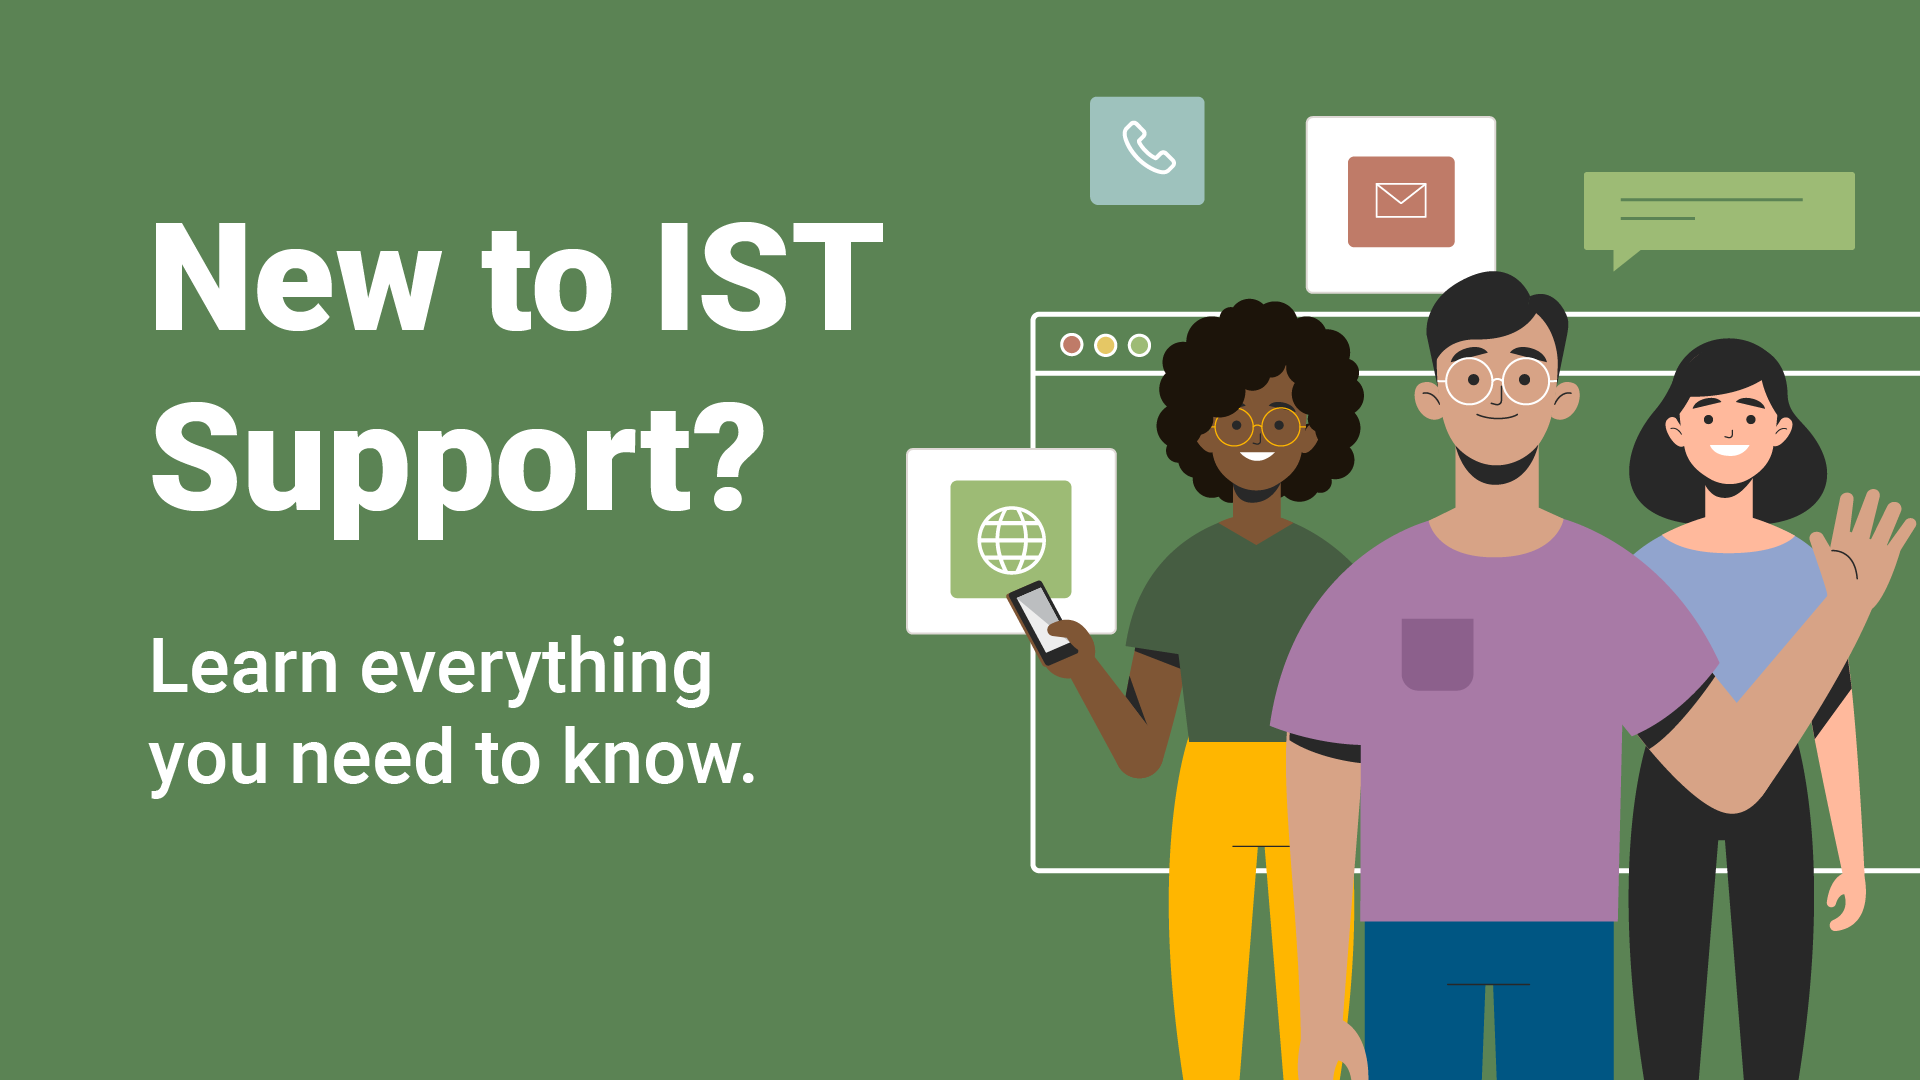 New to IST Support?